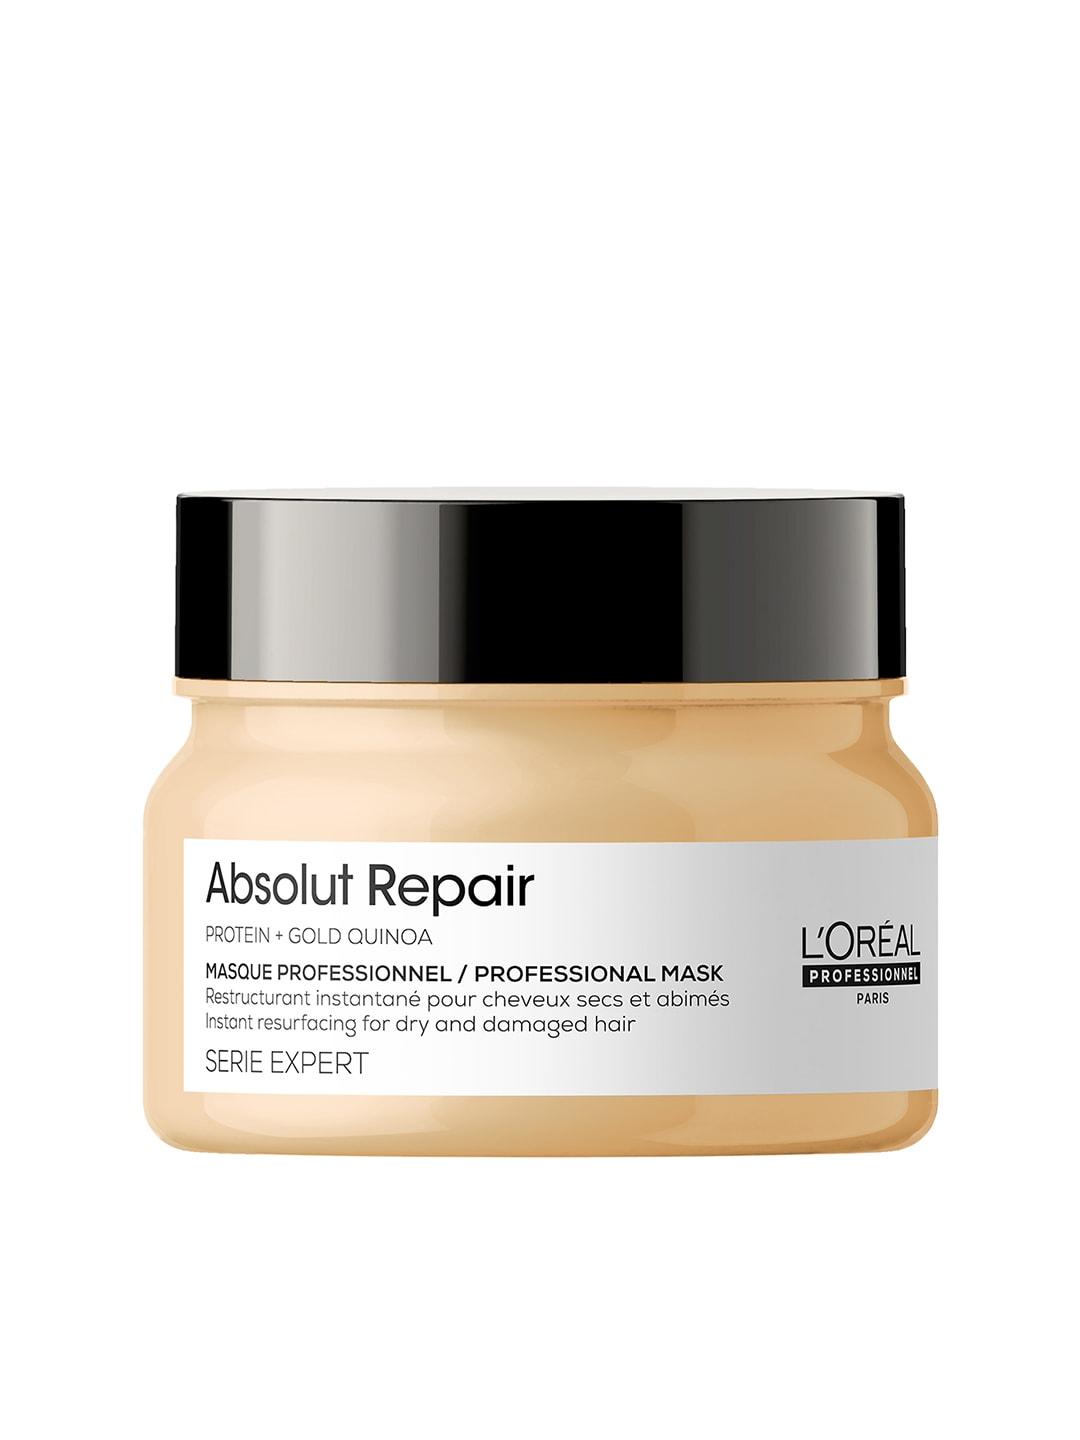 LOreal Professionnel Absolut Repair Hair Mask with Gold Quinoa for Damaged Hair-250g